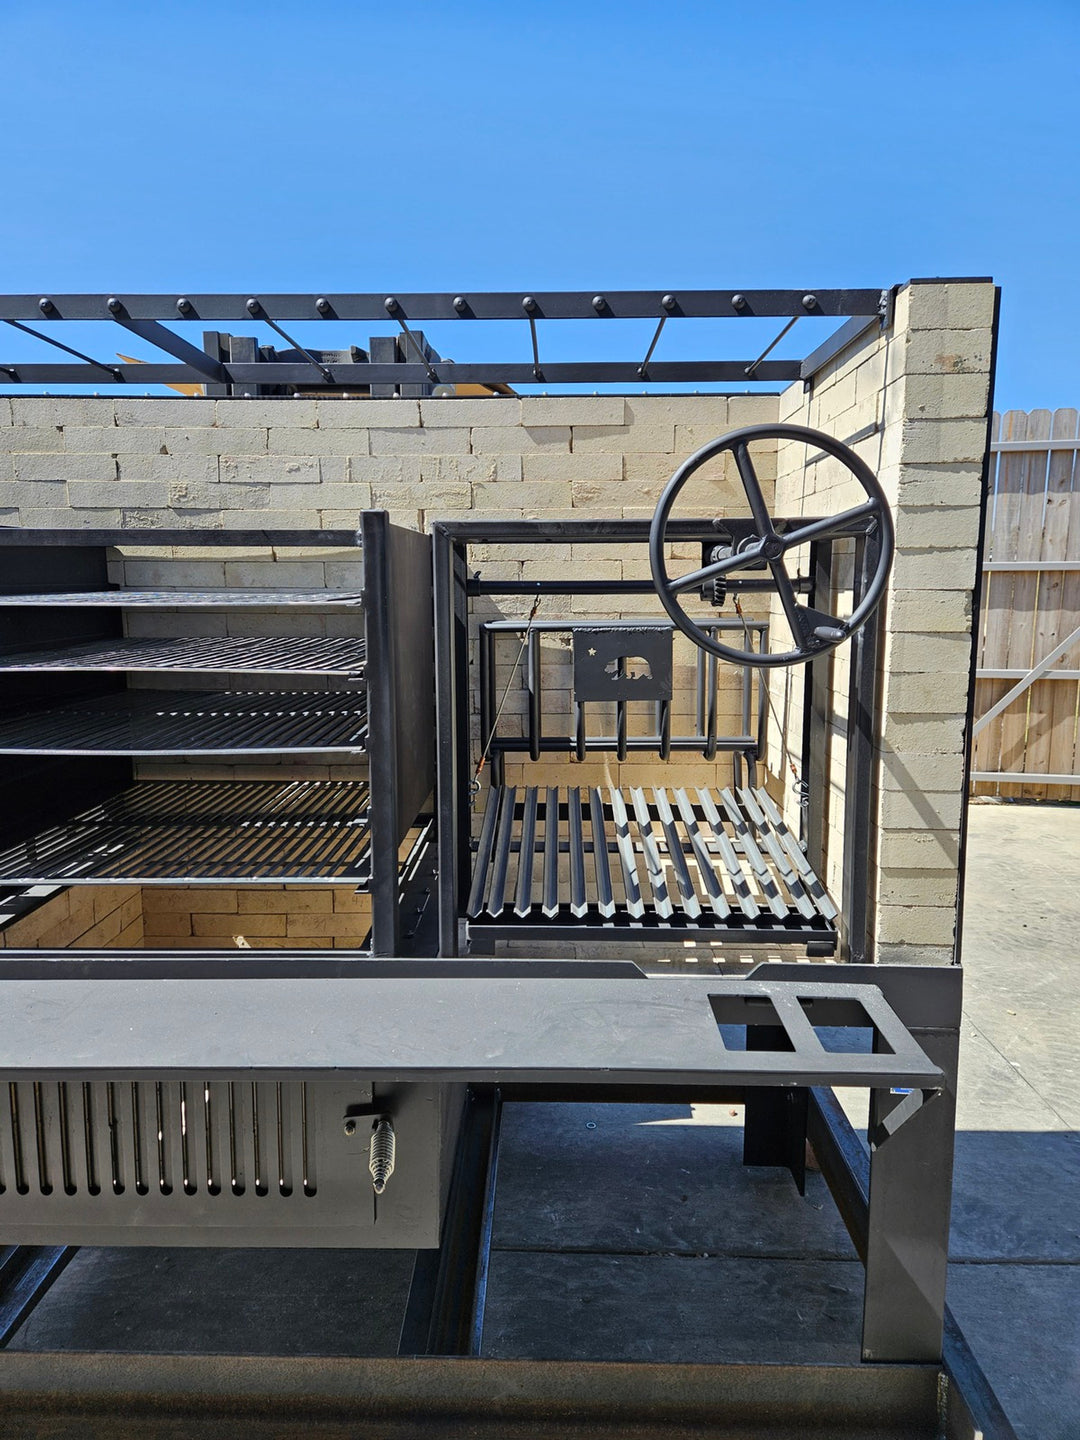 4642 COMMERCIAL Fire Table Grill